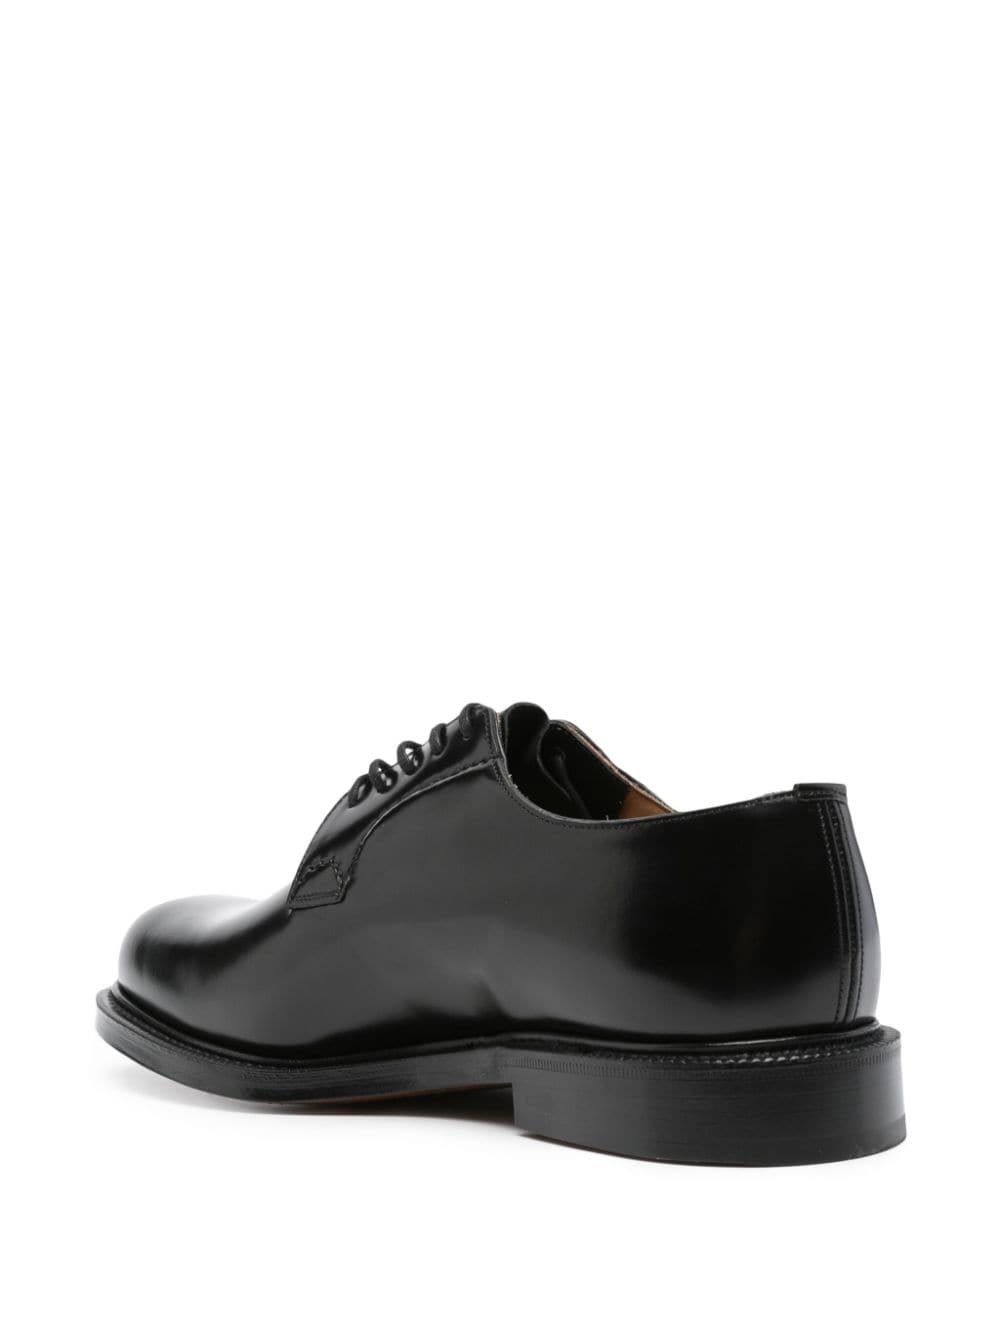 Shannon derby shoes - 3